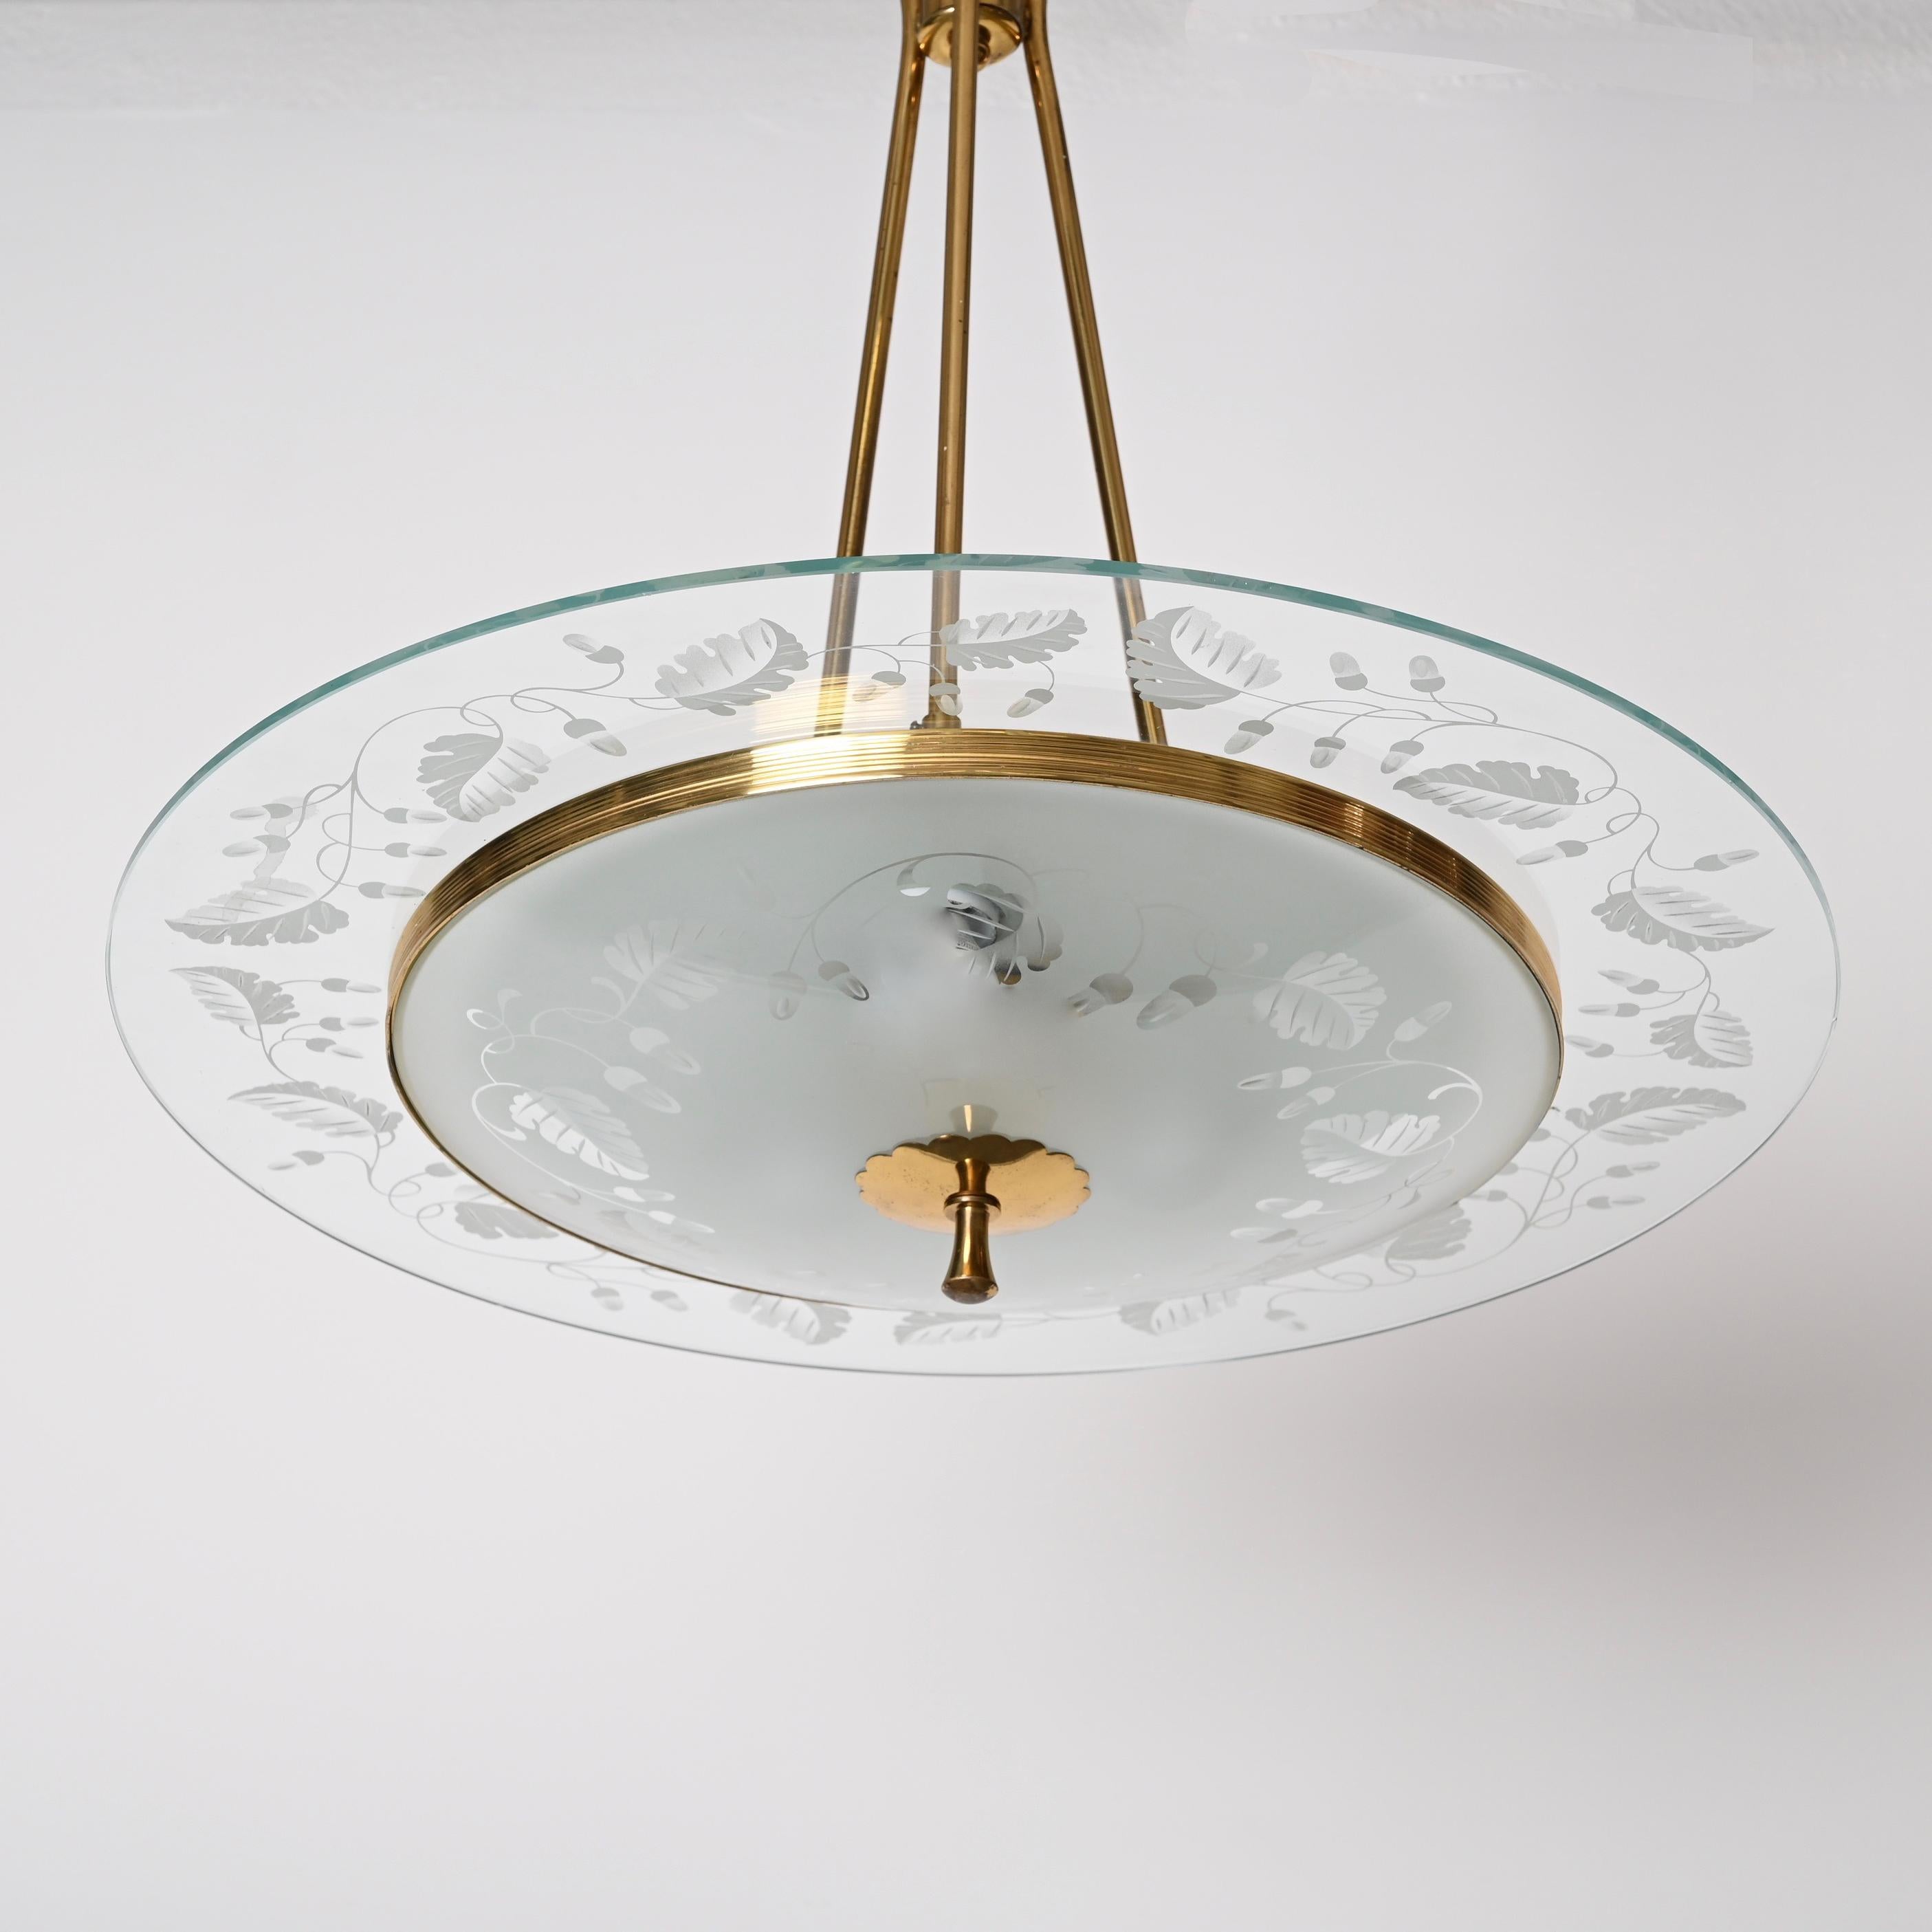 Magnificent Italian large chandelier in solid brass and engraved Murano crystal glass. This fantastic piece was designed by Pietro Chiesa in Italy during the 1940s for Fontana Arte.

This stunning chandelier consists of two large crystal glass